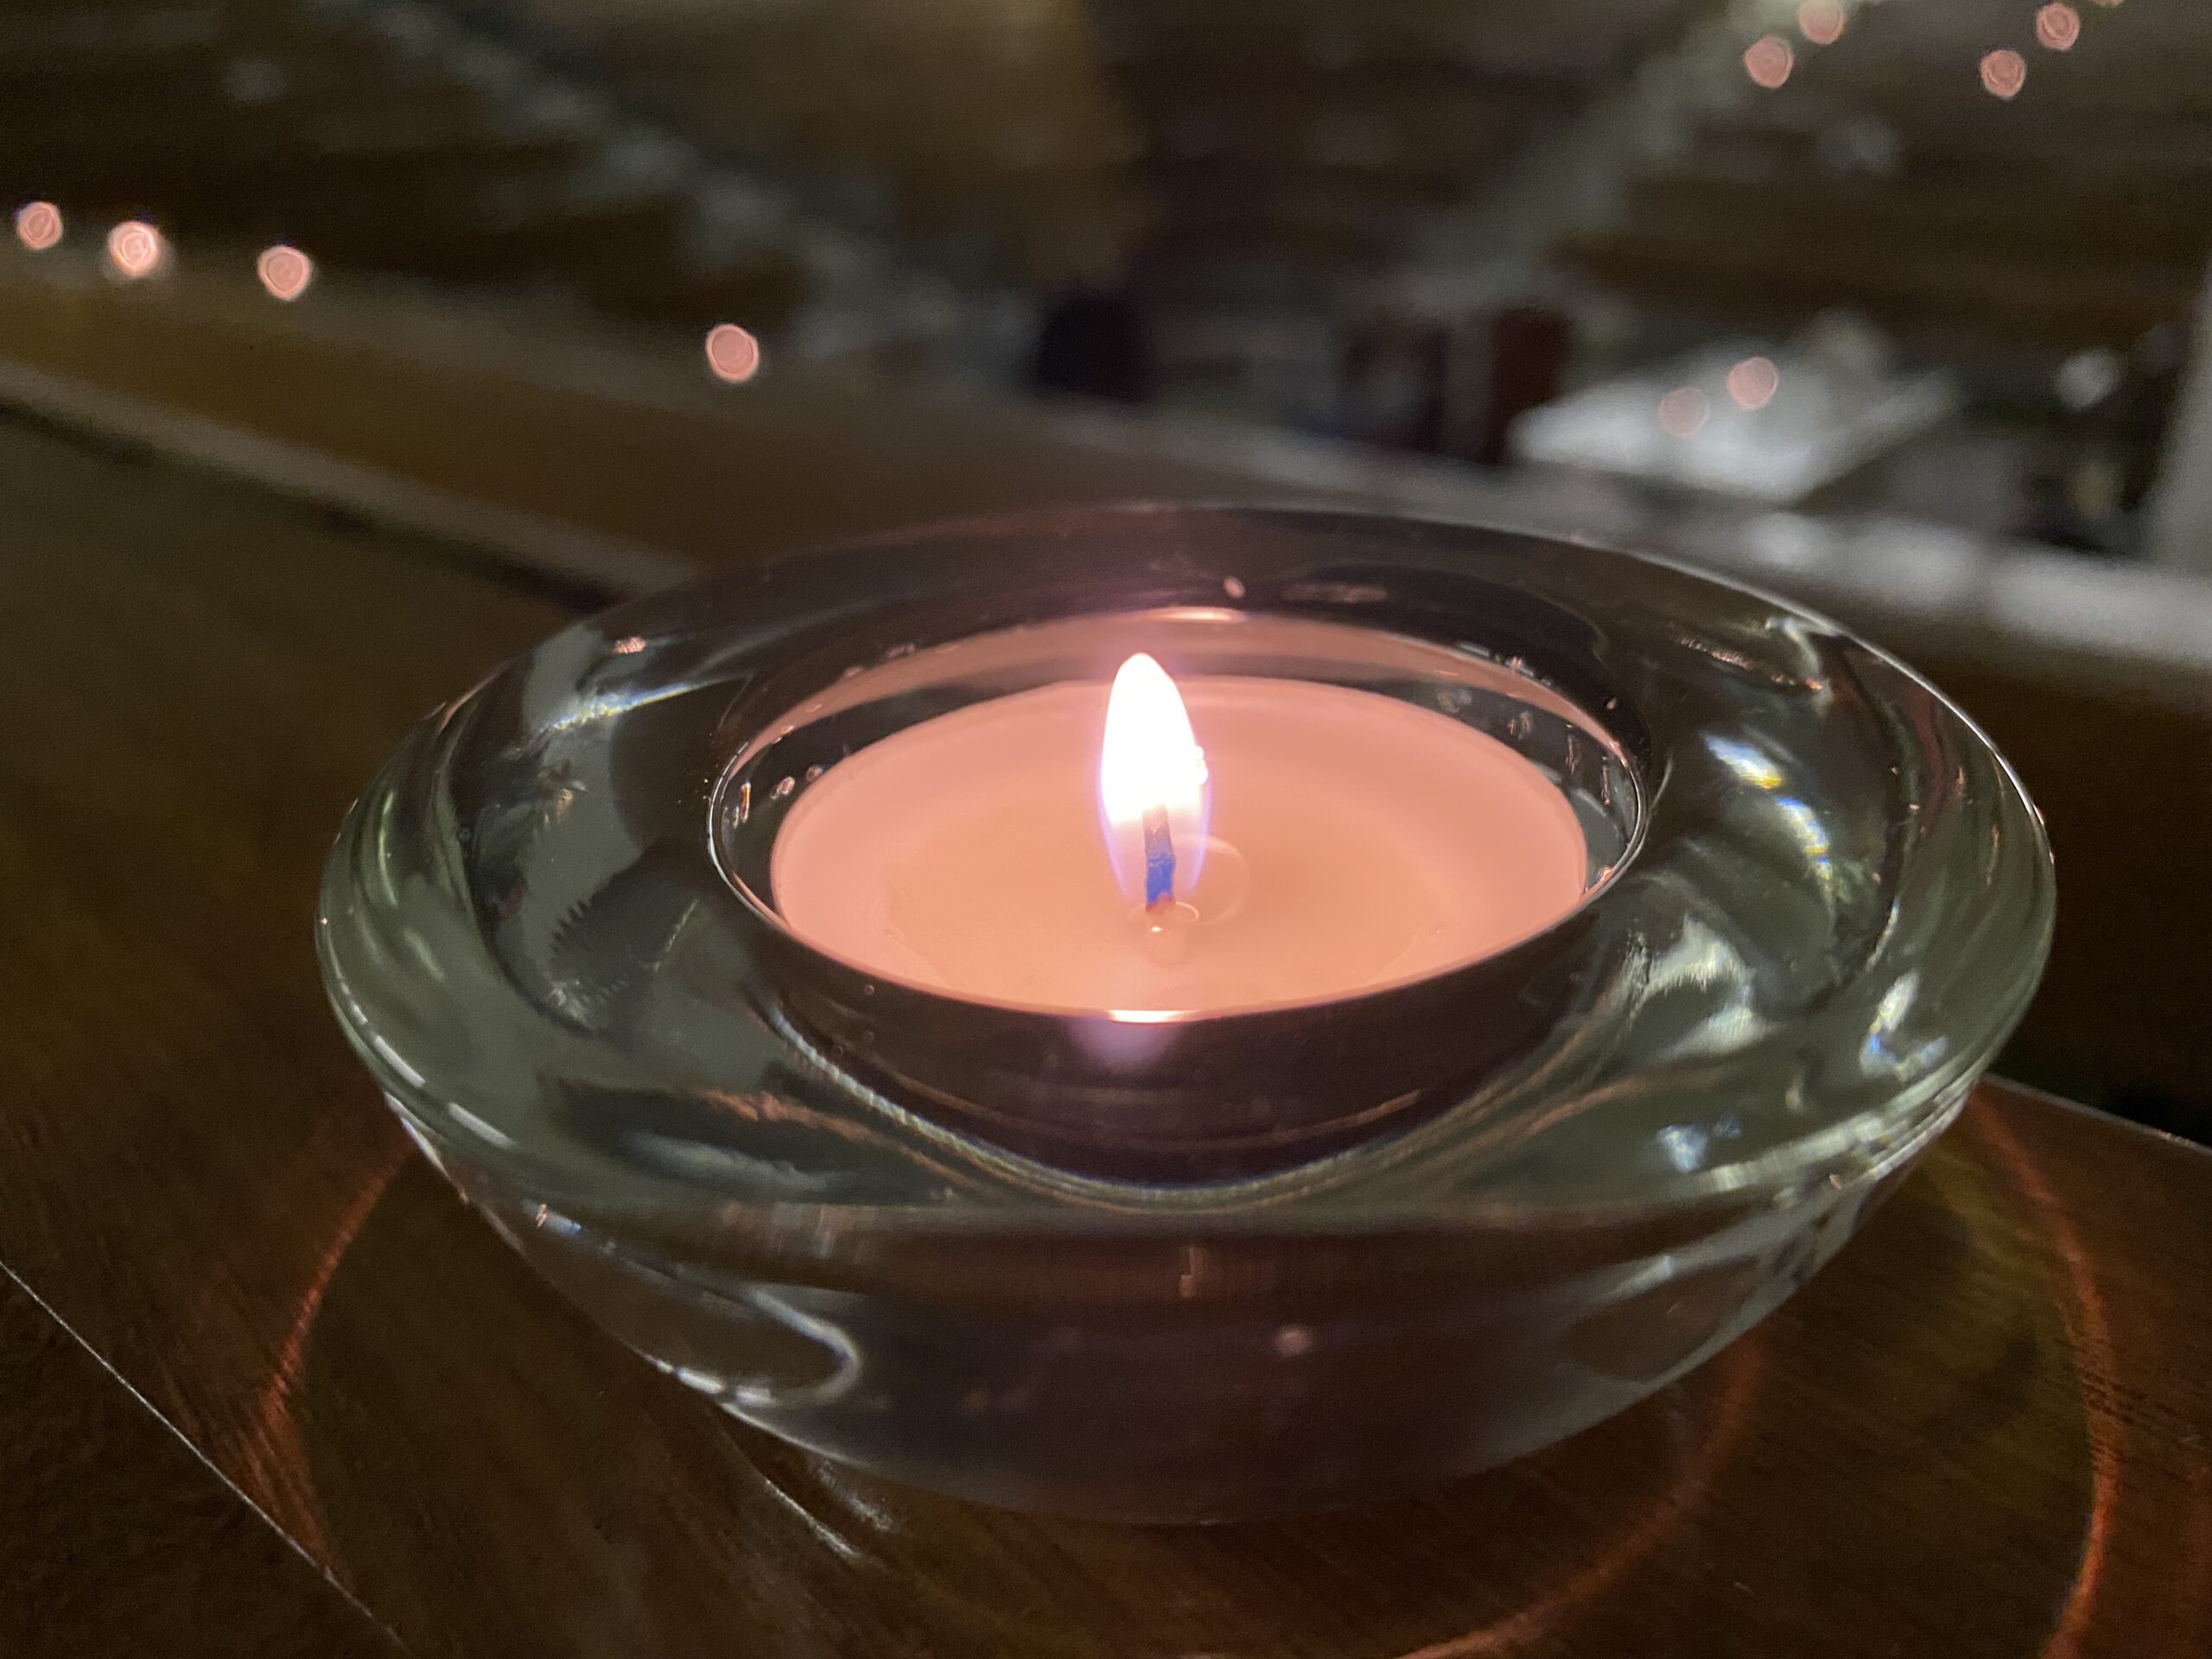 Winter Wednesdays – An hour of peace, music and candlelight